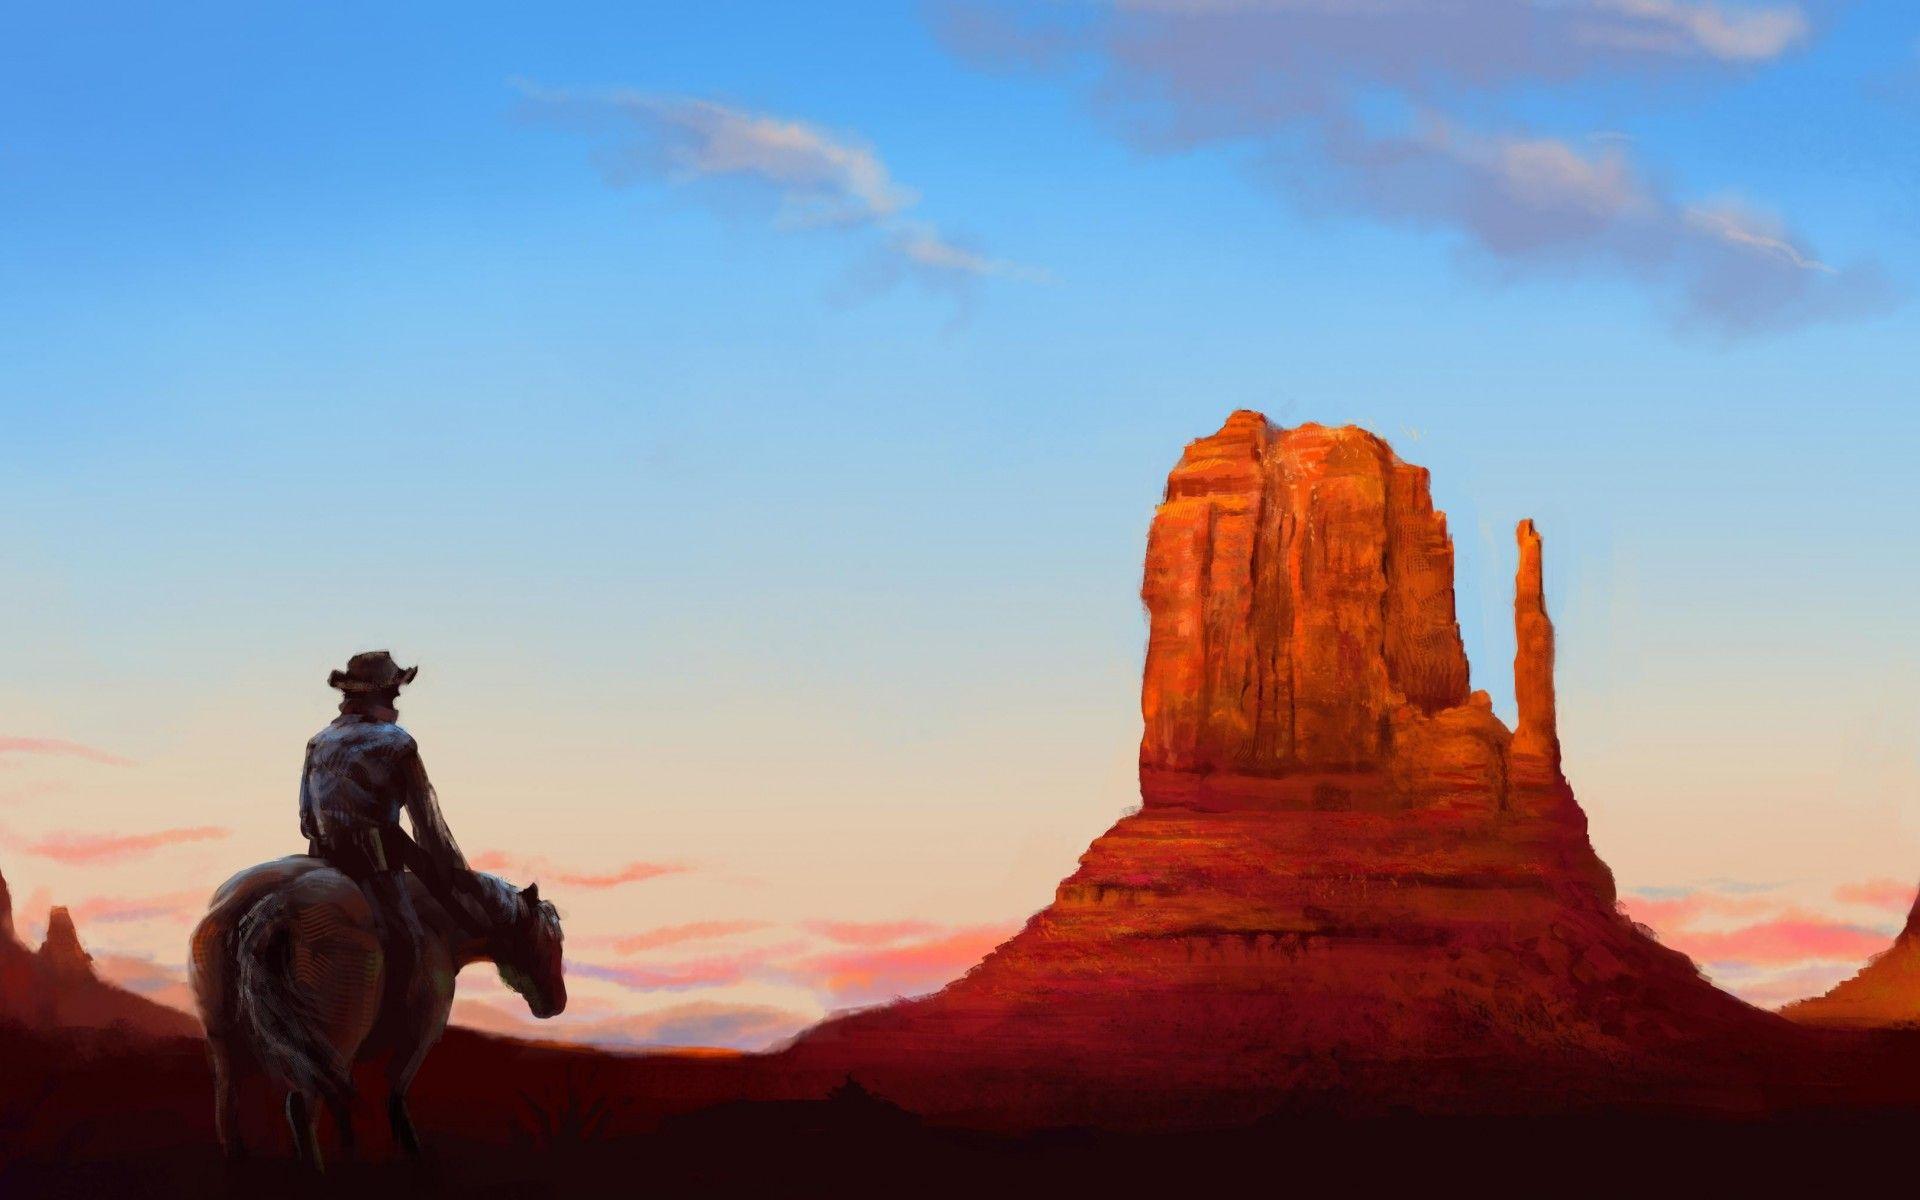 Wild West Backgrounds - Wallpaper Cave